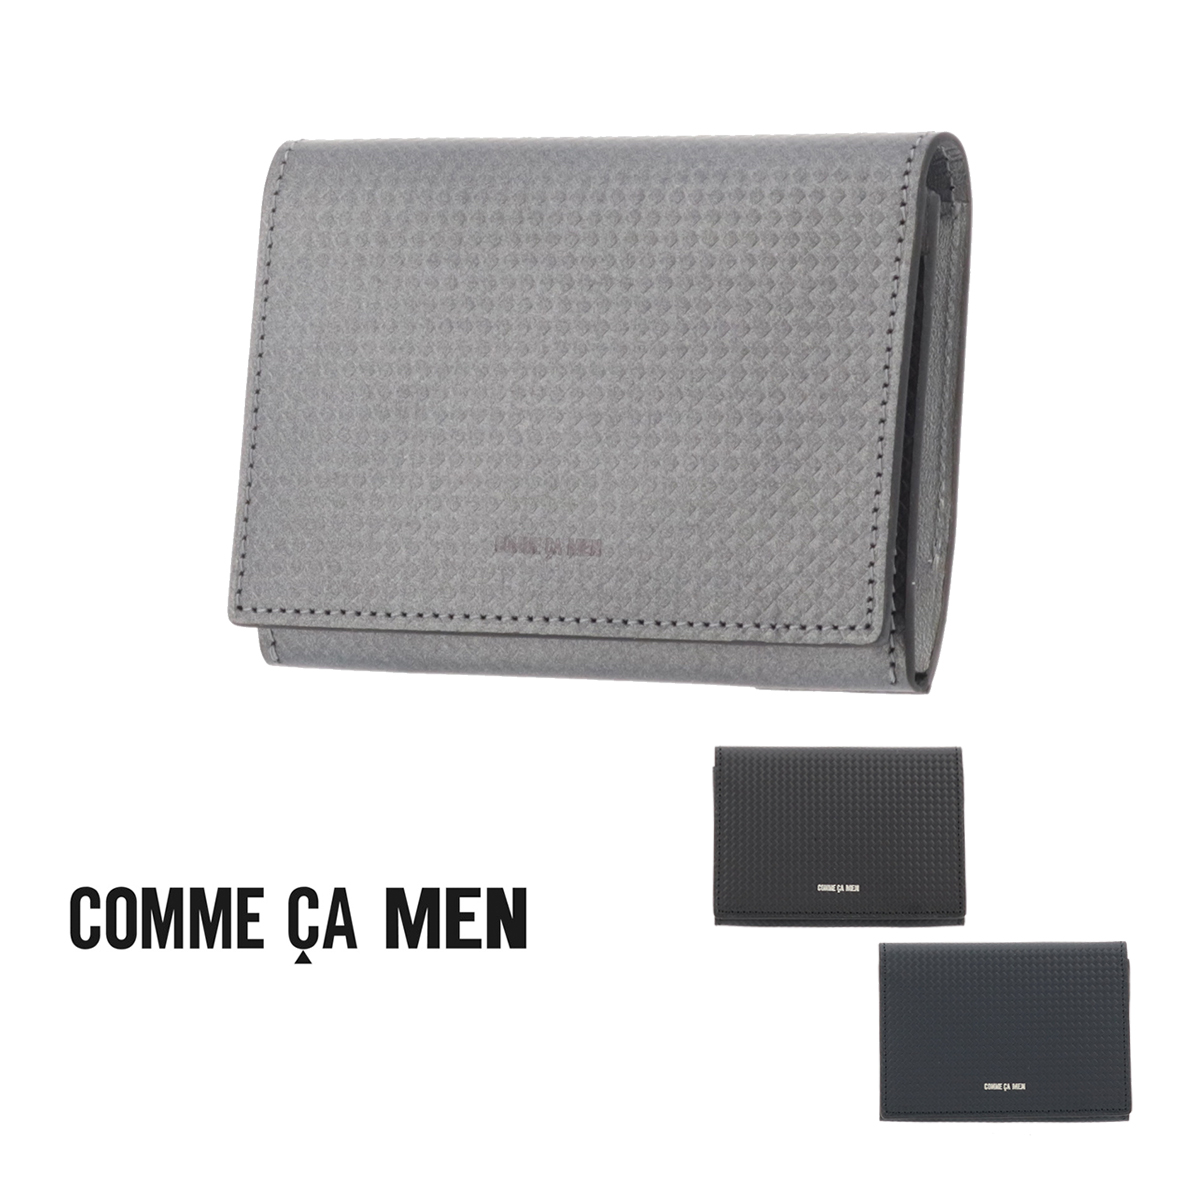 COMME CA MEN コムサメン 名刺入れ